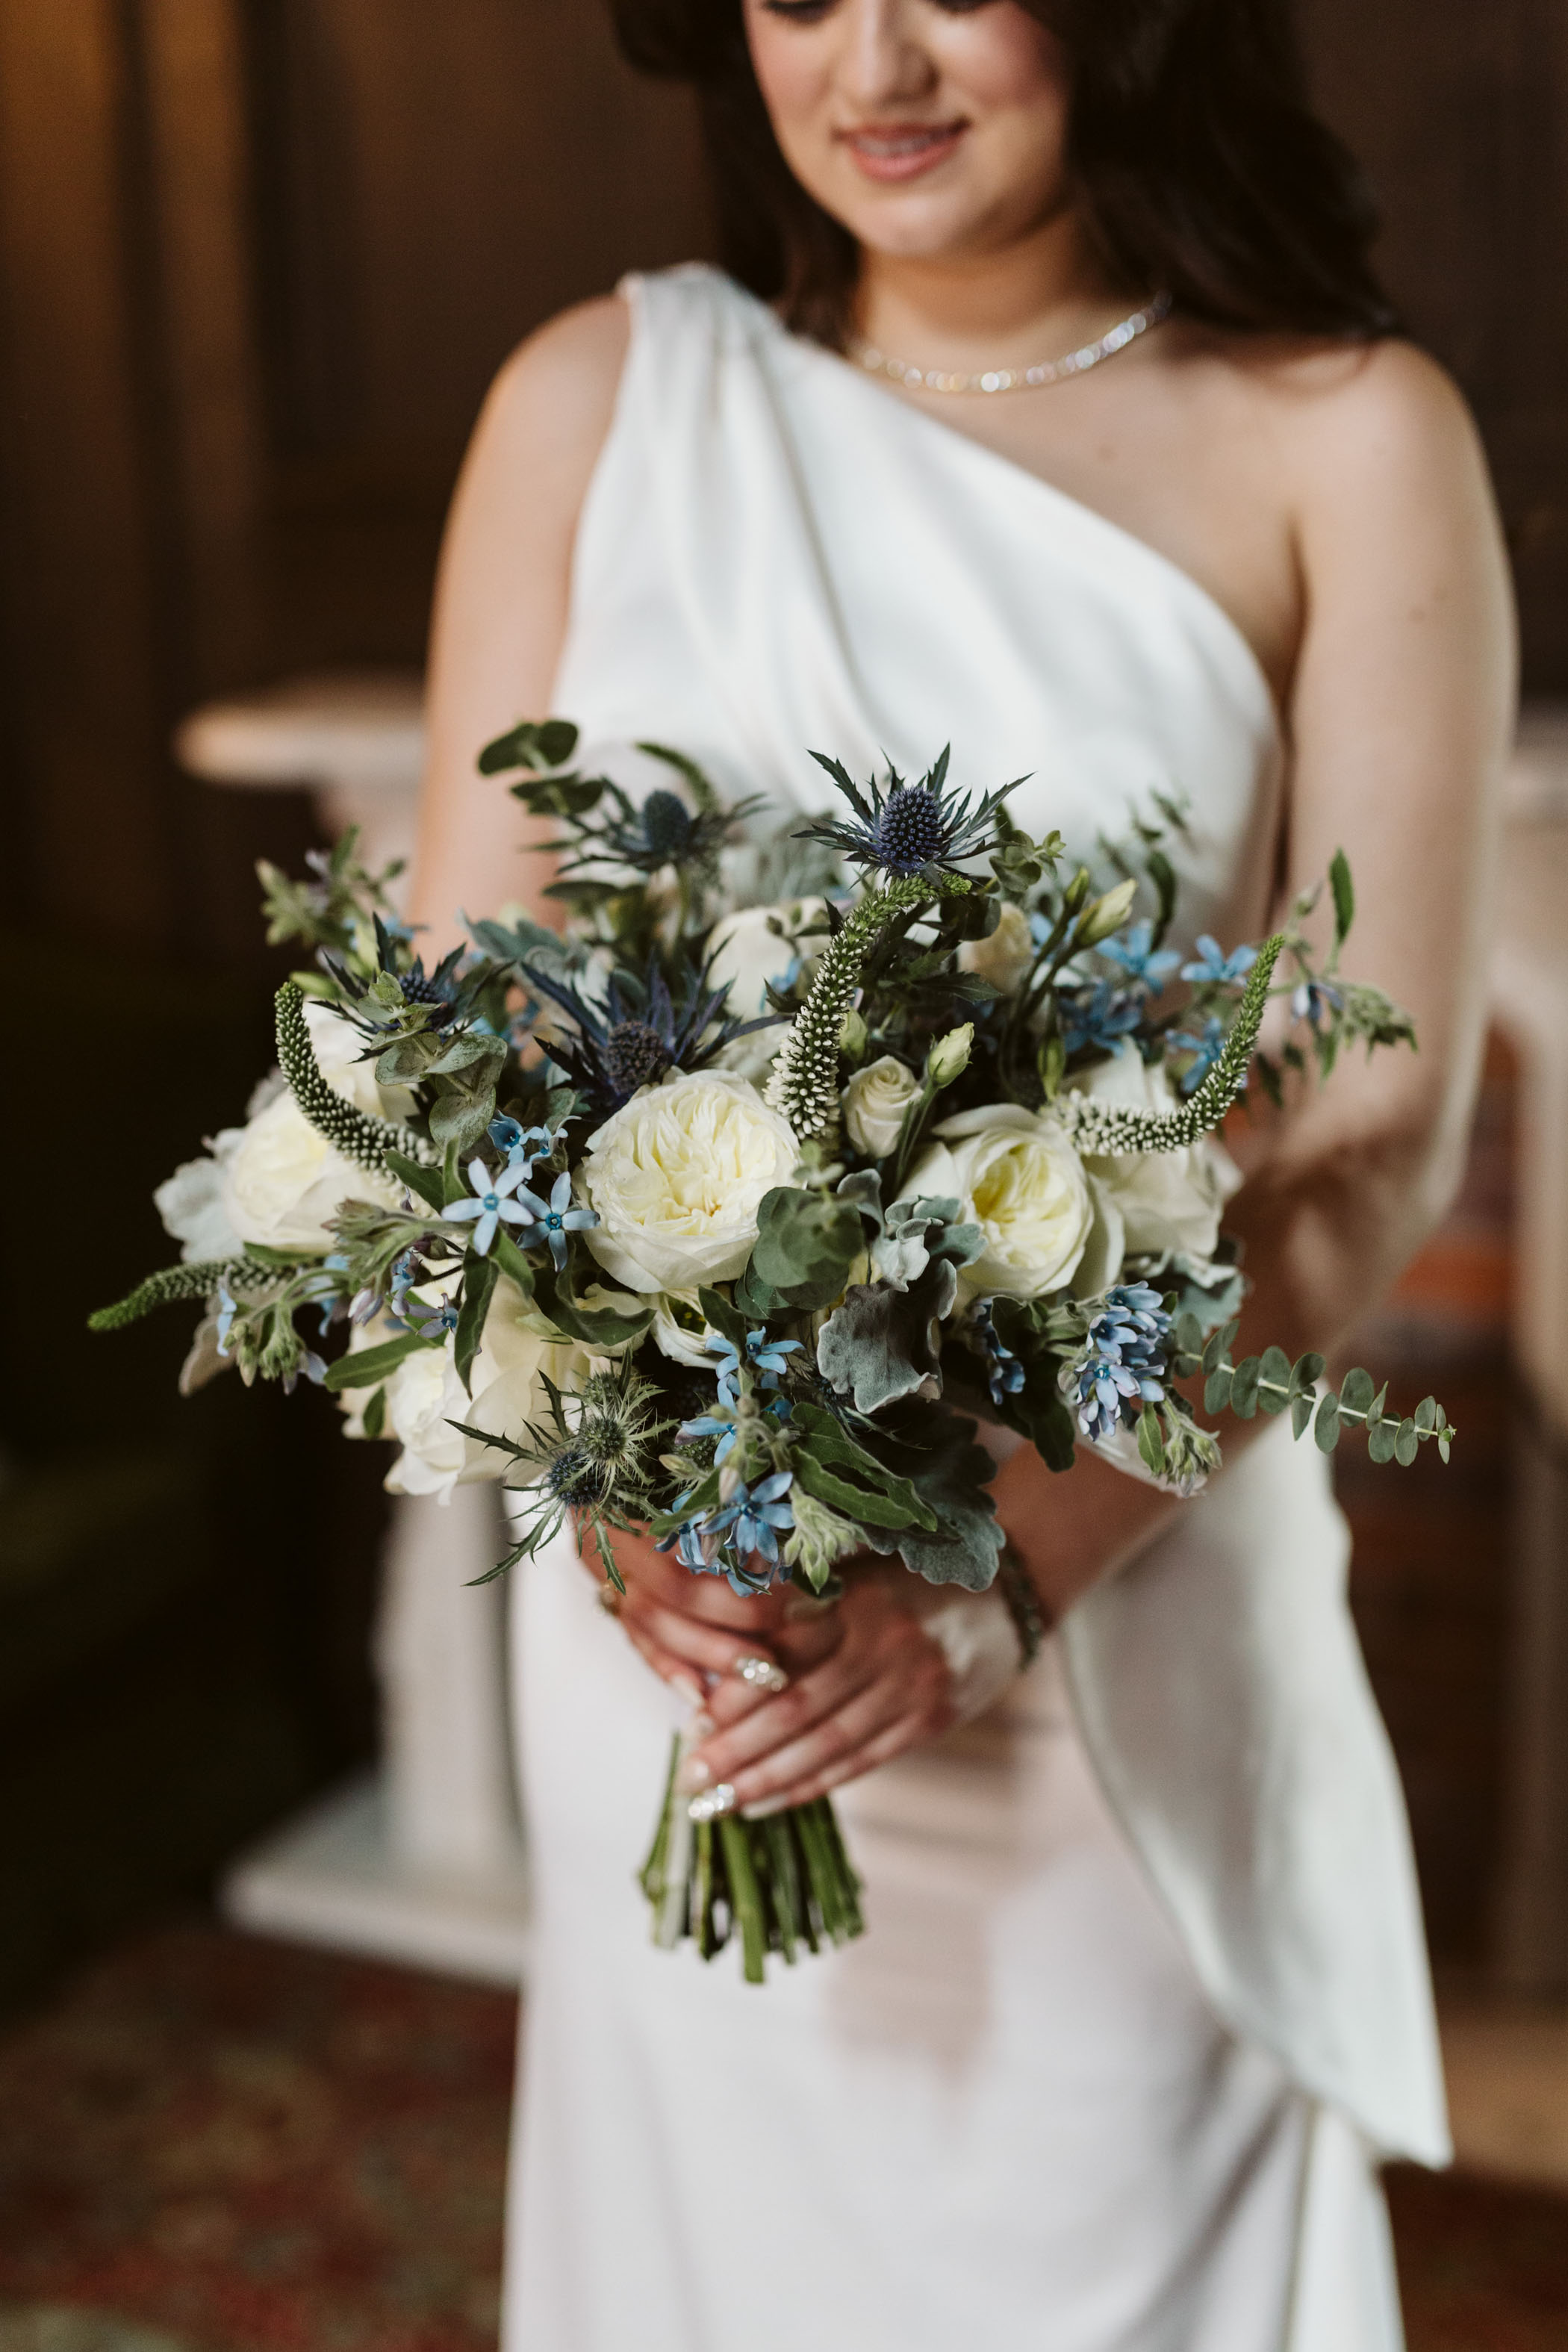 Green, white, and blue wedding bouquet